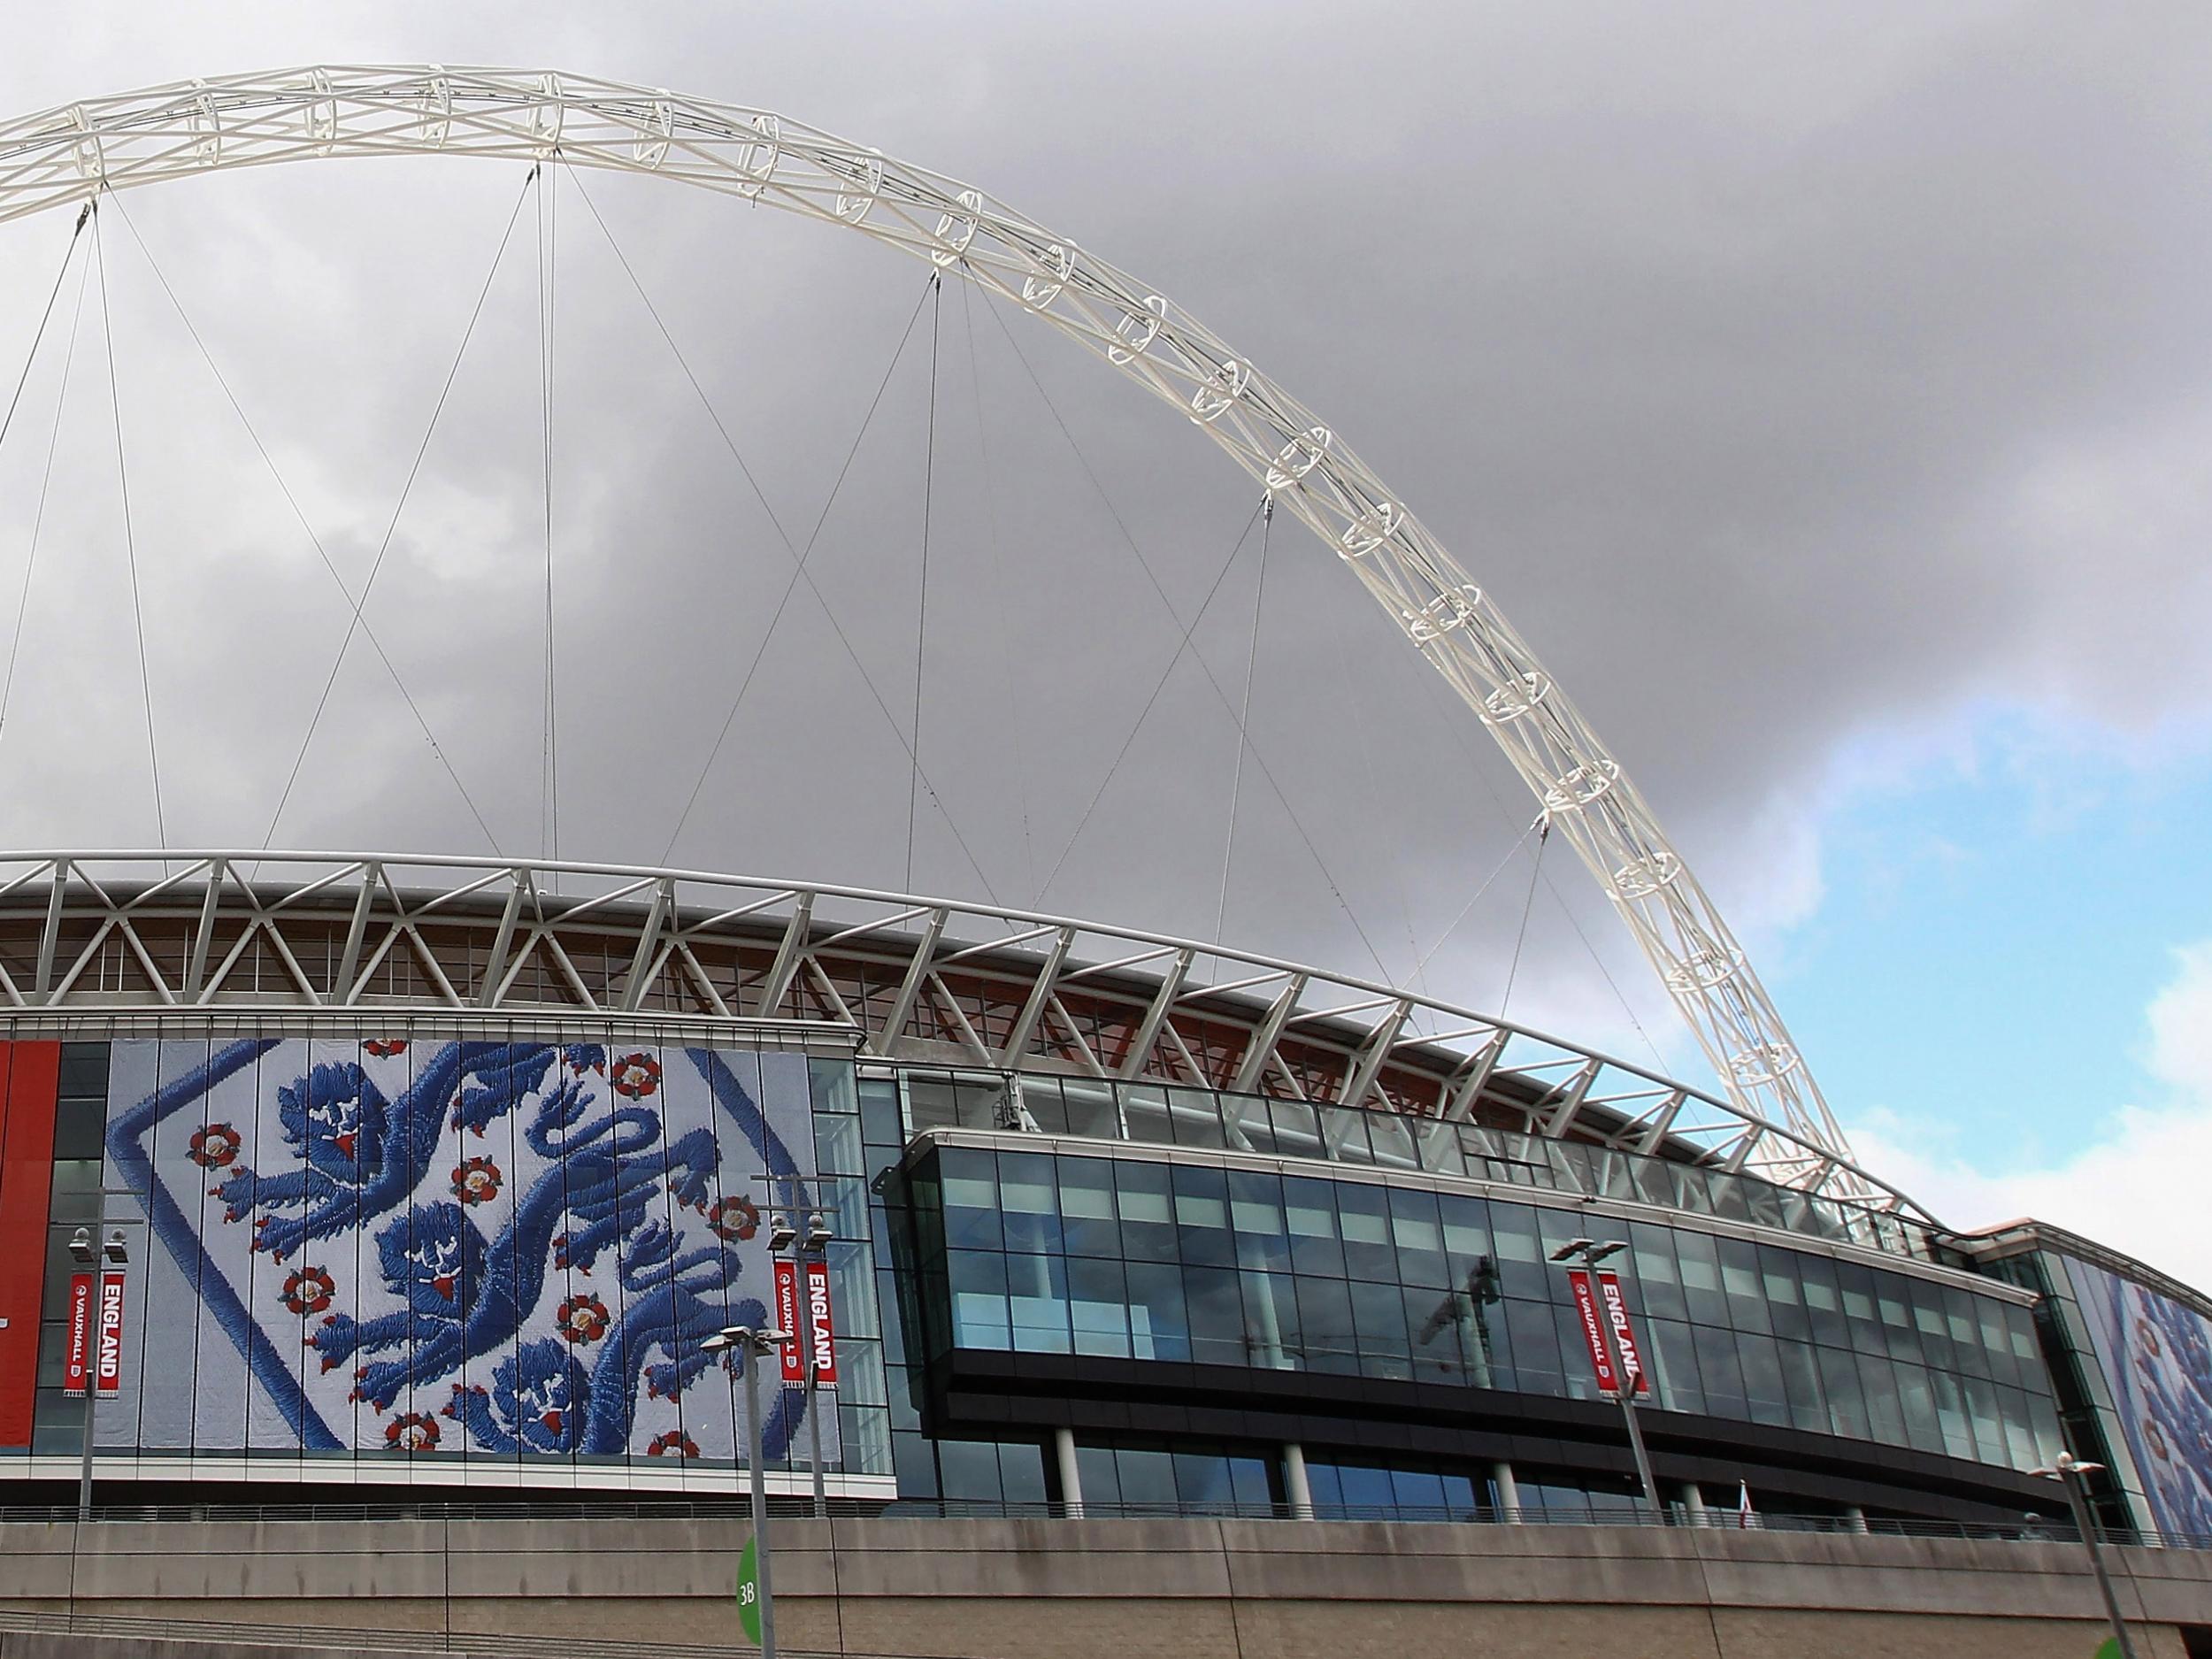 Former FA chiefs have written a joint letter to Parliament and called for government legislation to reform the FA